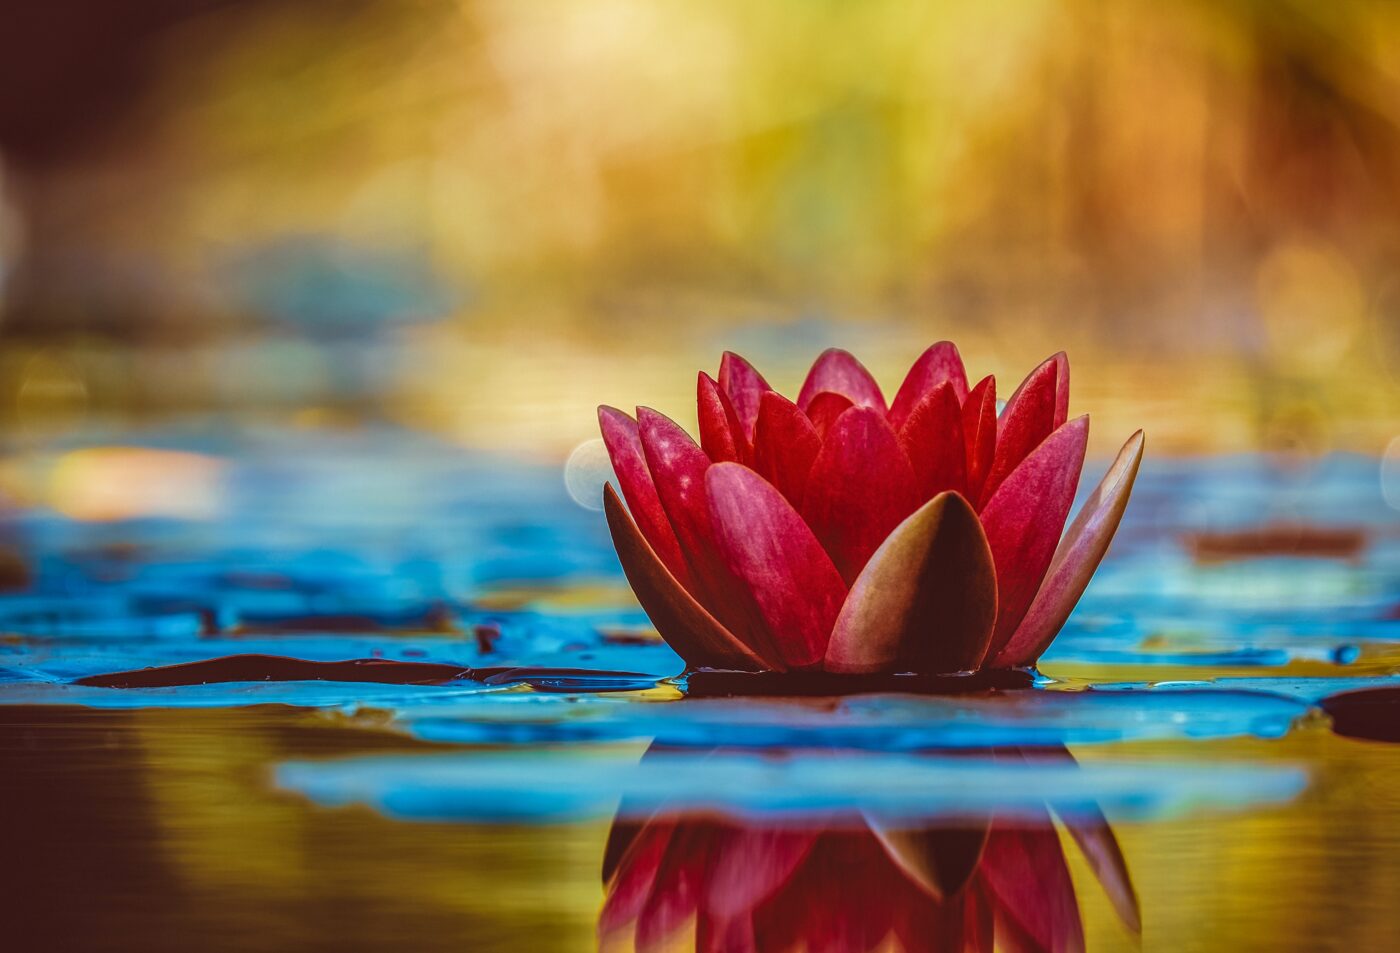 Photo by Couleur: https://www.pexels.com/photo/selective-focus-photography-of-red-waterlily-flower-in-bloom-2302908/